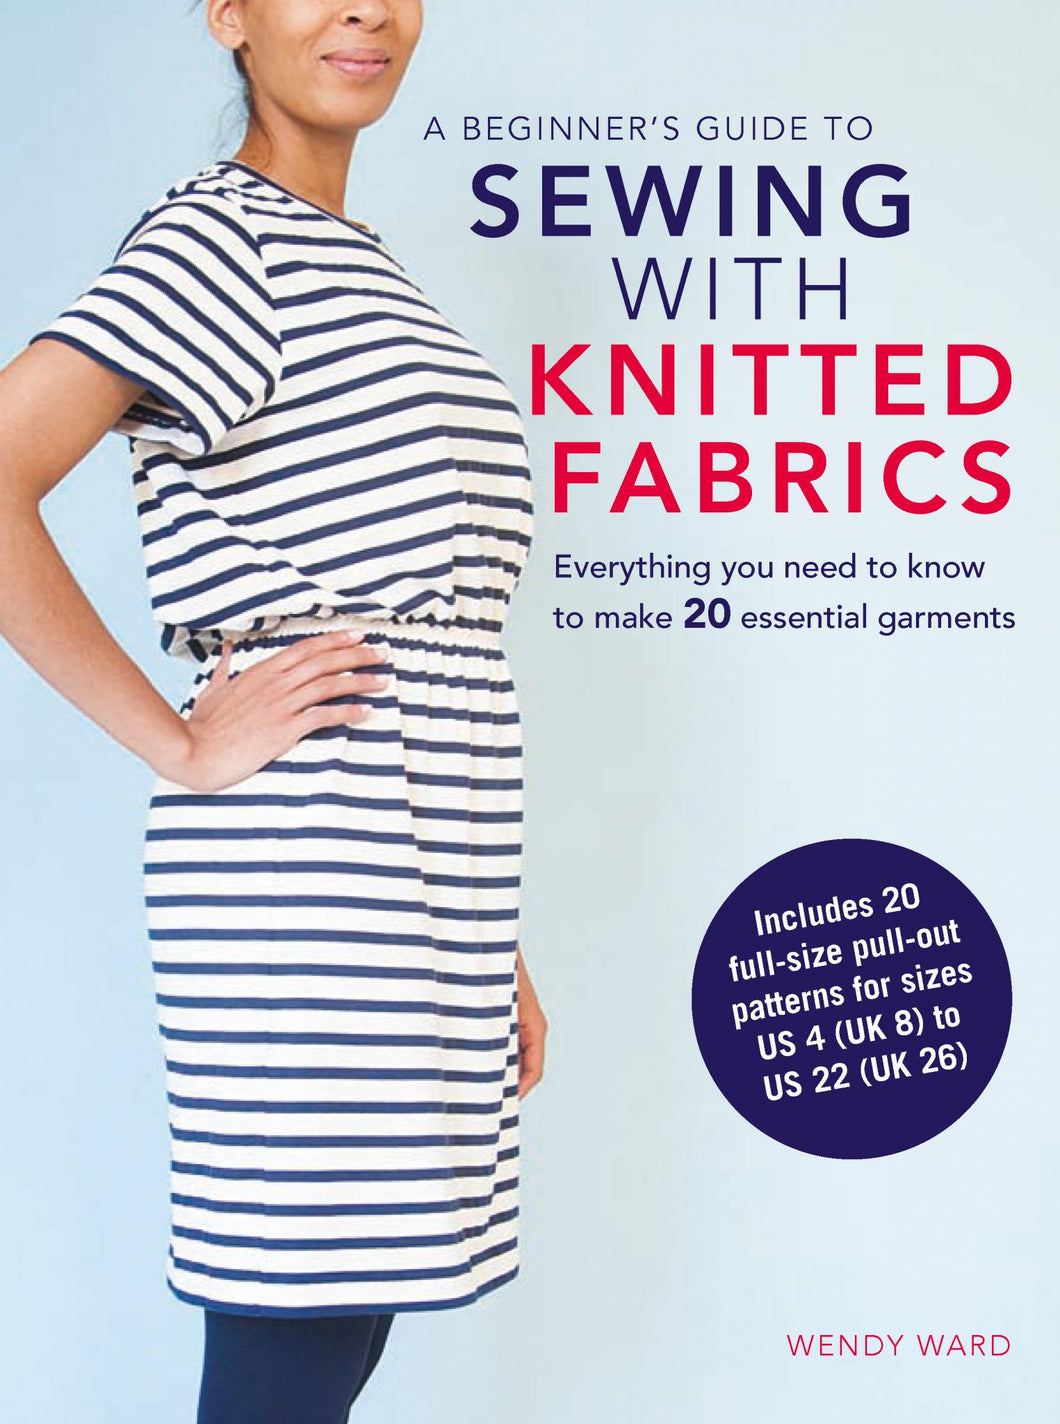 A Beginner’s Guide to Sewing with Knitted Fabrics